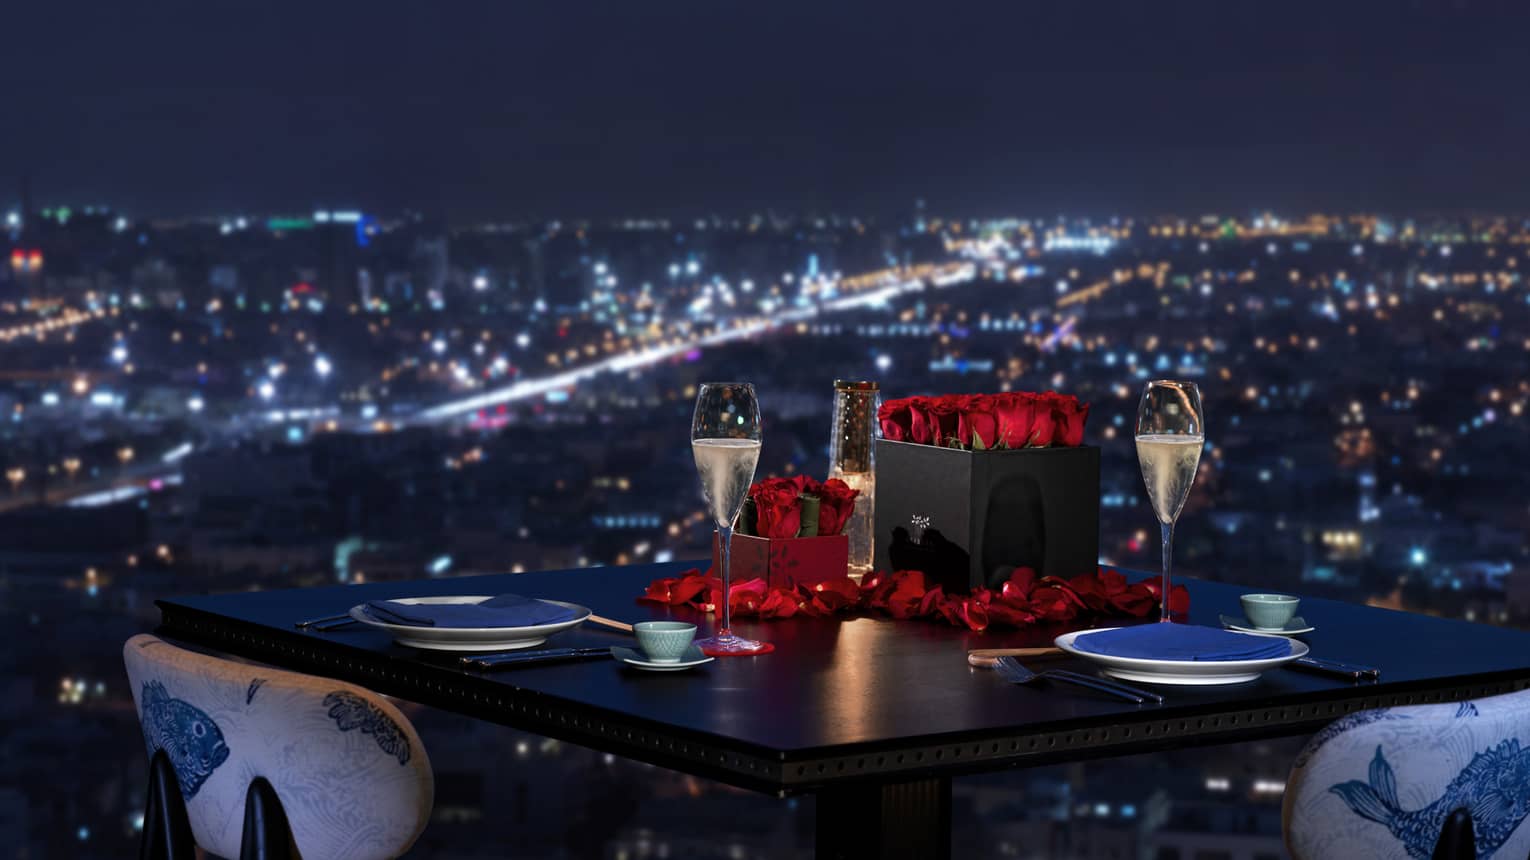 Sintoho dining table, red roses and Champagne glasses by window overlooking city lights below